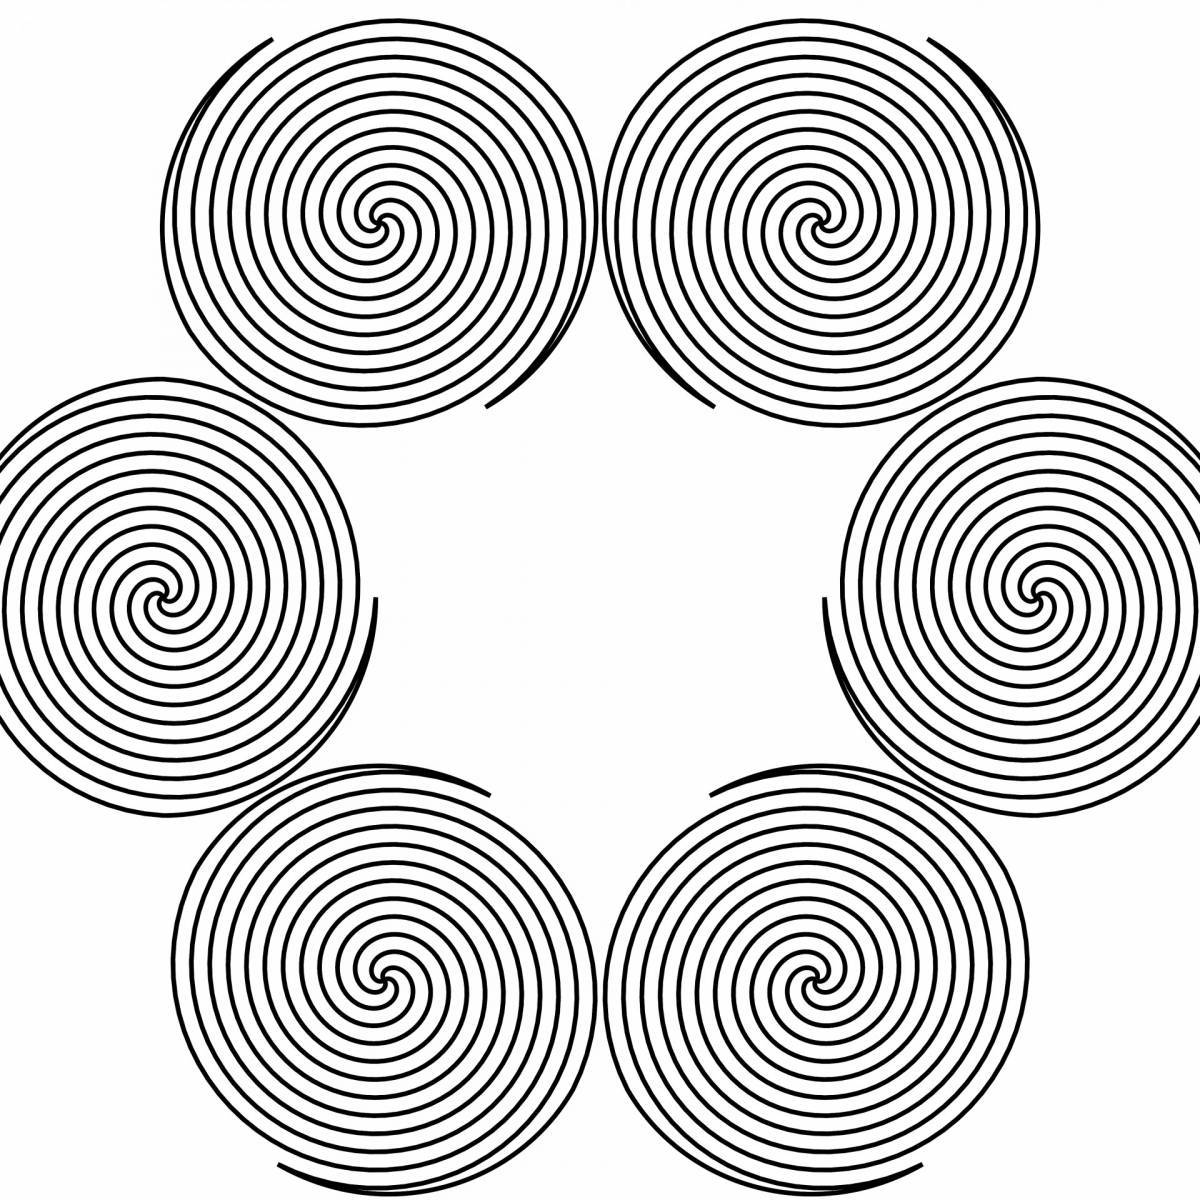 Coloring page gorgeous spiral pattern